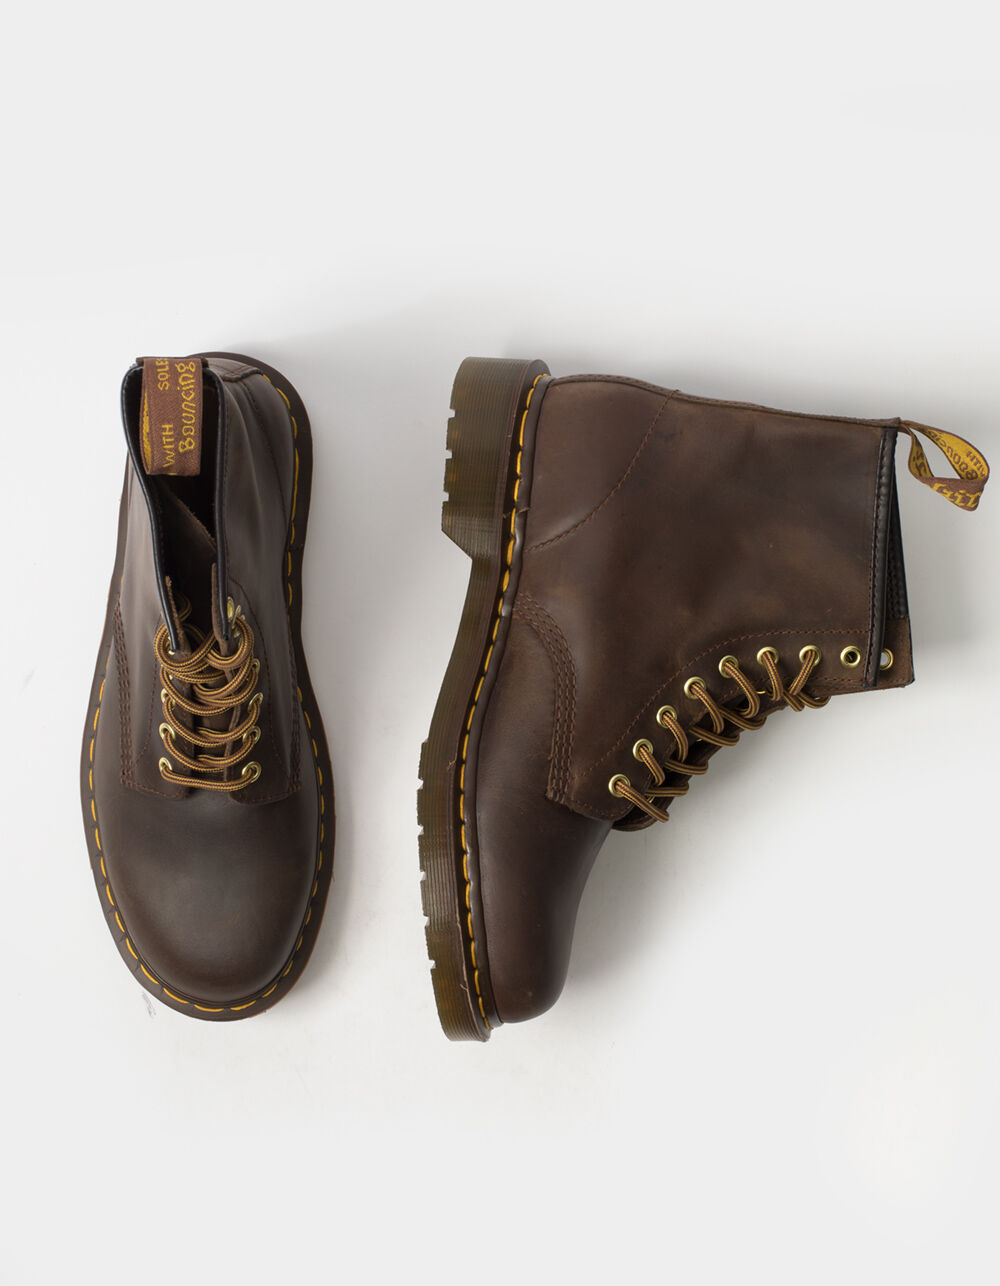 Salida Perpetuo patrulla DR MARTENS 1460 Crazy Horse Leather Lace Up Mens Boots - BROWN | Tillys